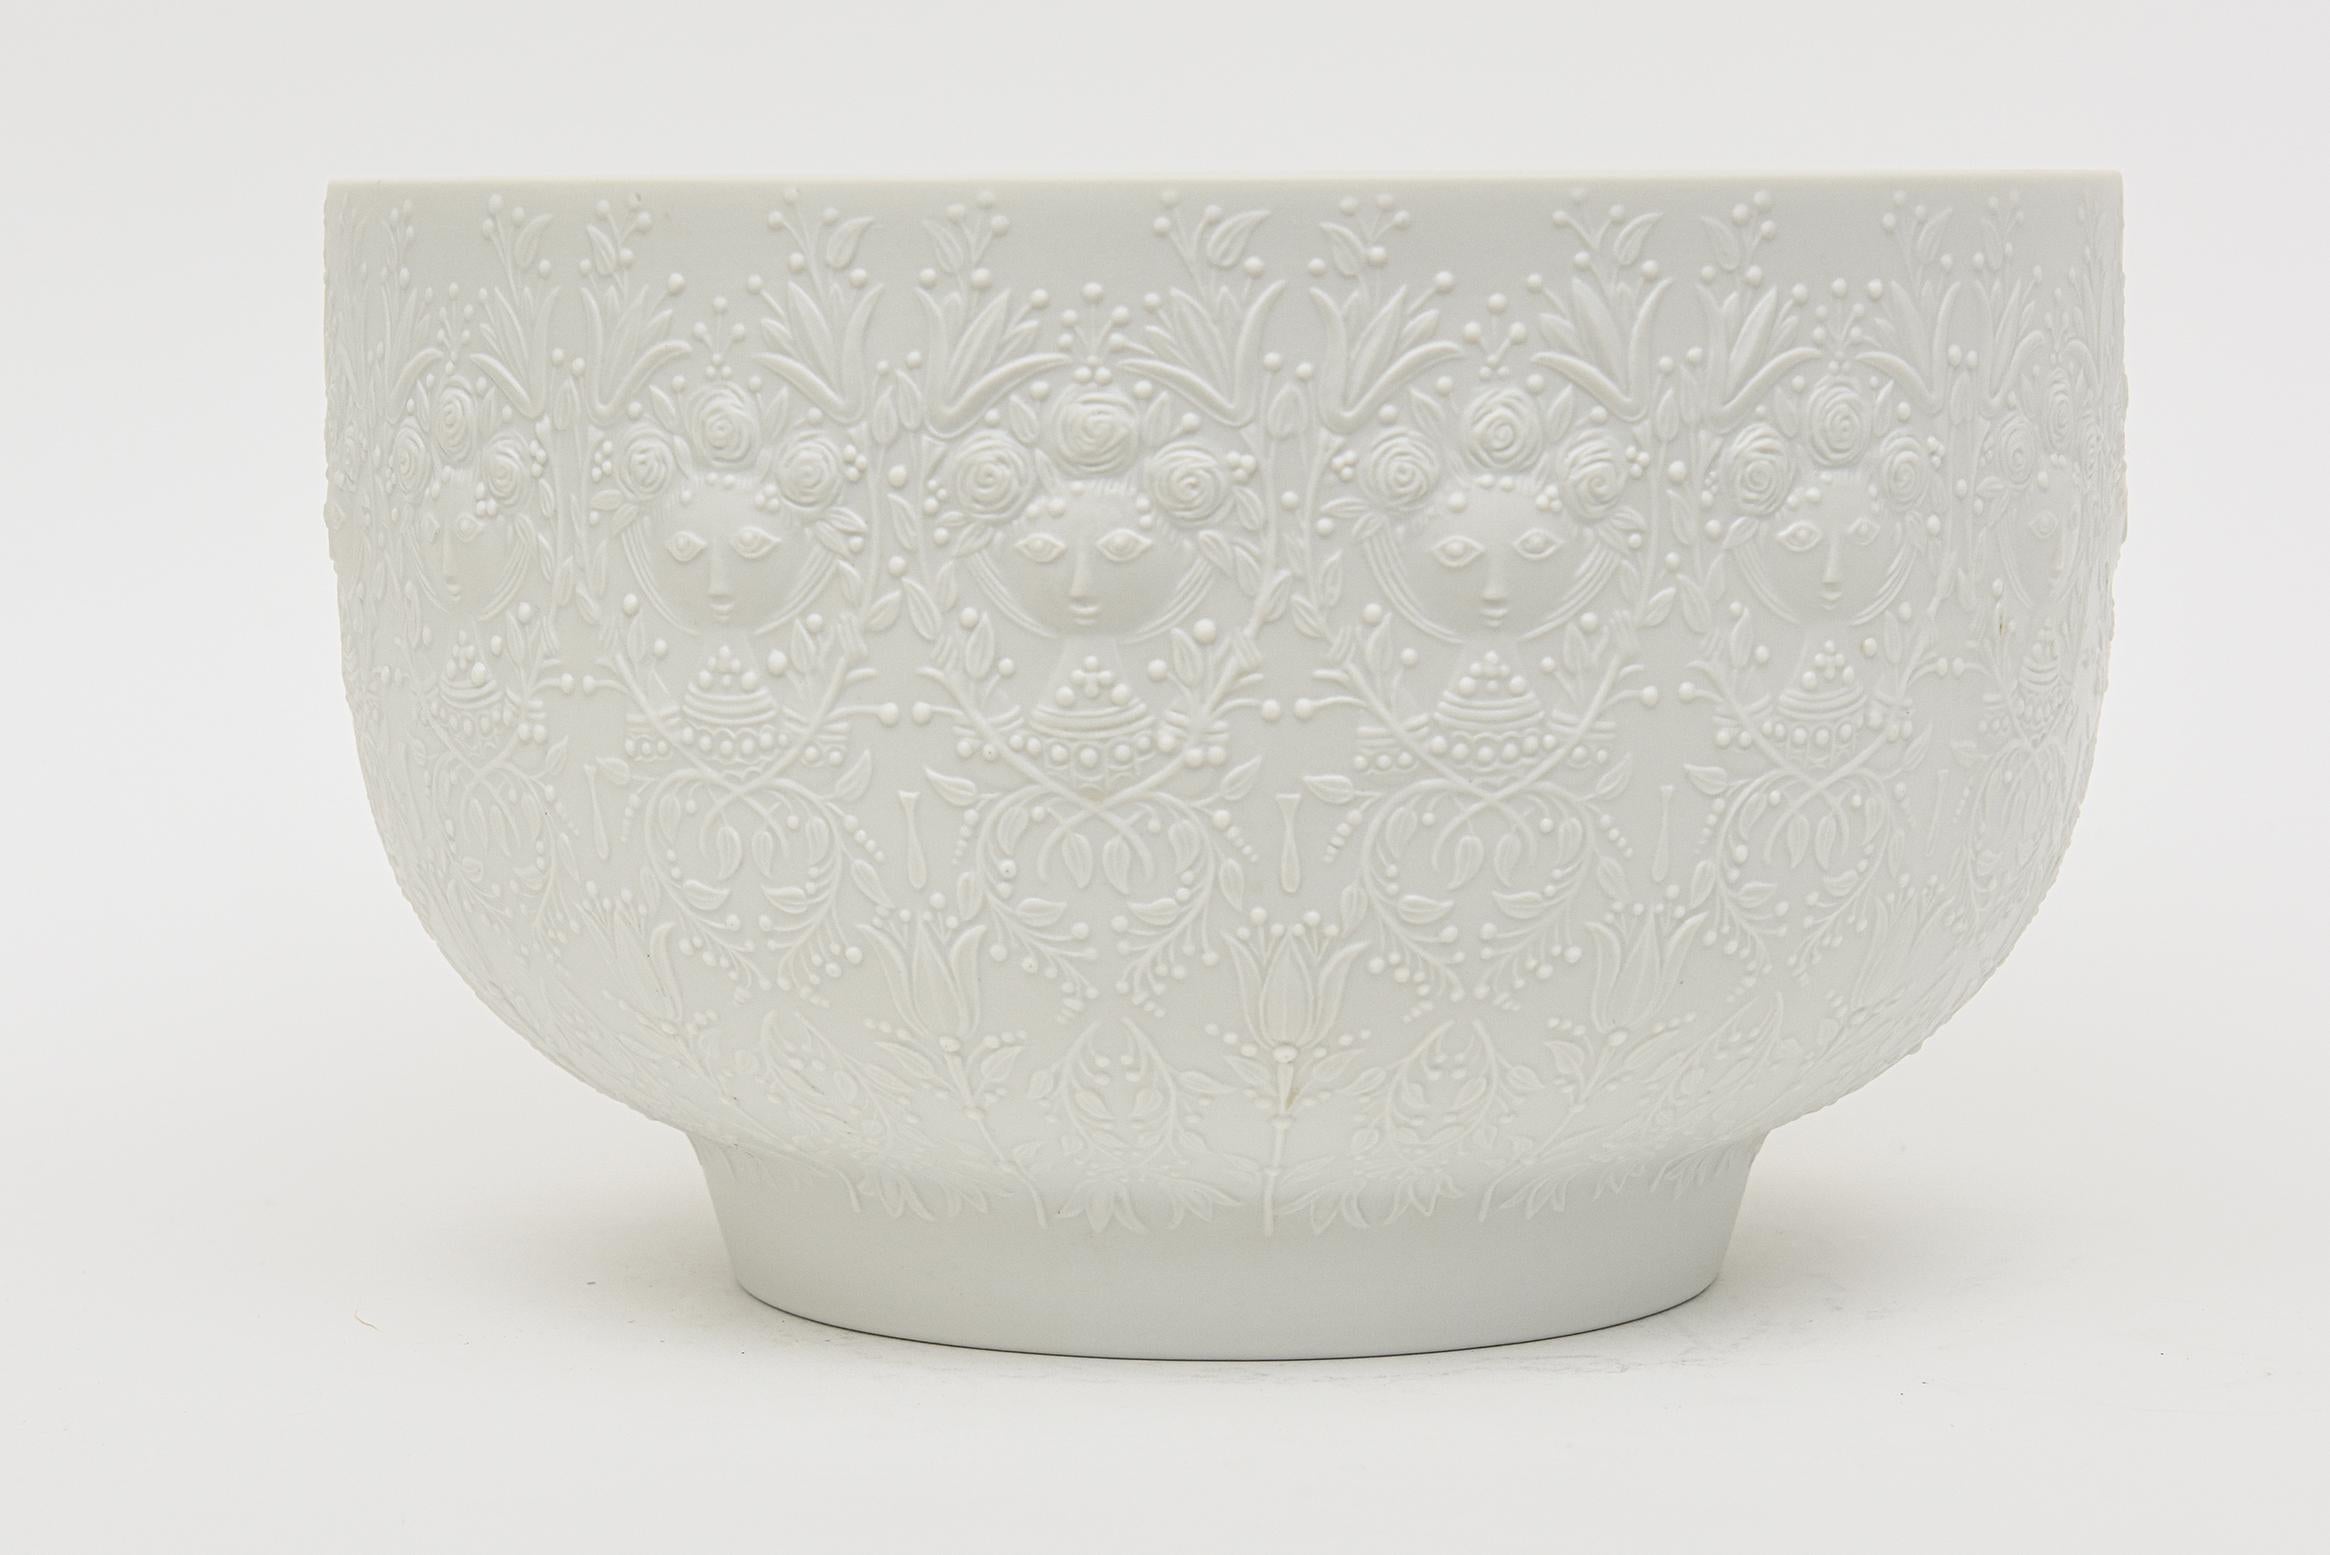 This fabulous monumental vintage hallmarked porcelain white mat bisque bowl was designed by Bjorn Wiinblad for Rosenthal Studio LInie from Germany. It is textural and has raised faces surround that Bjorn Wiinblad was so known for. This is rare